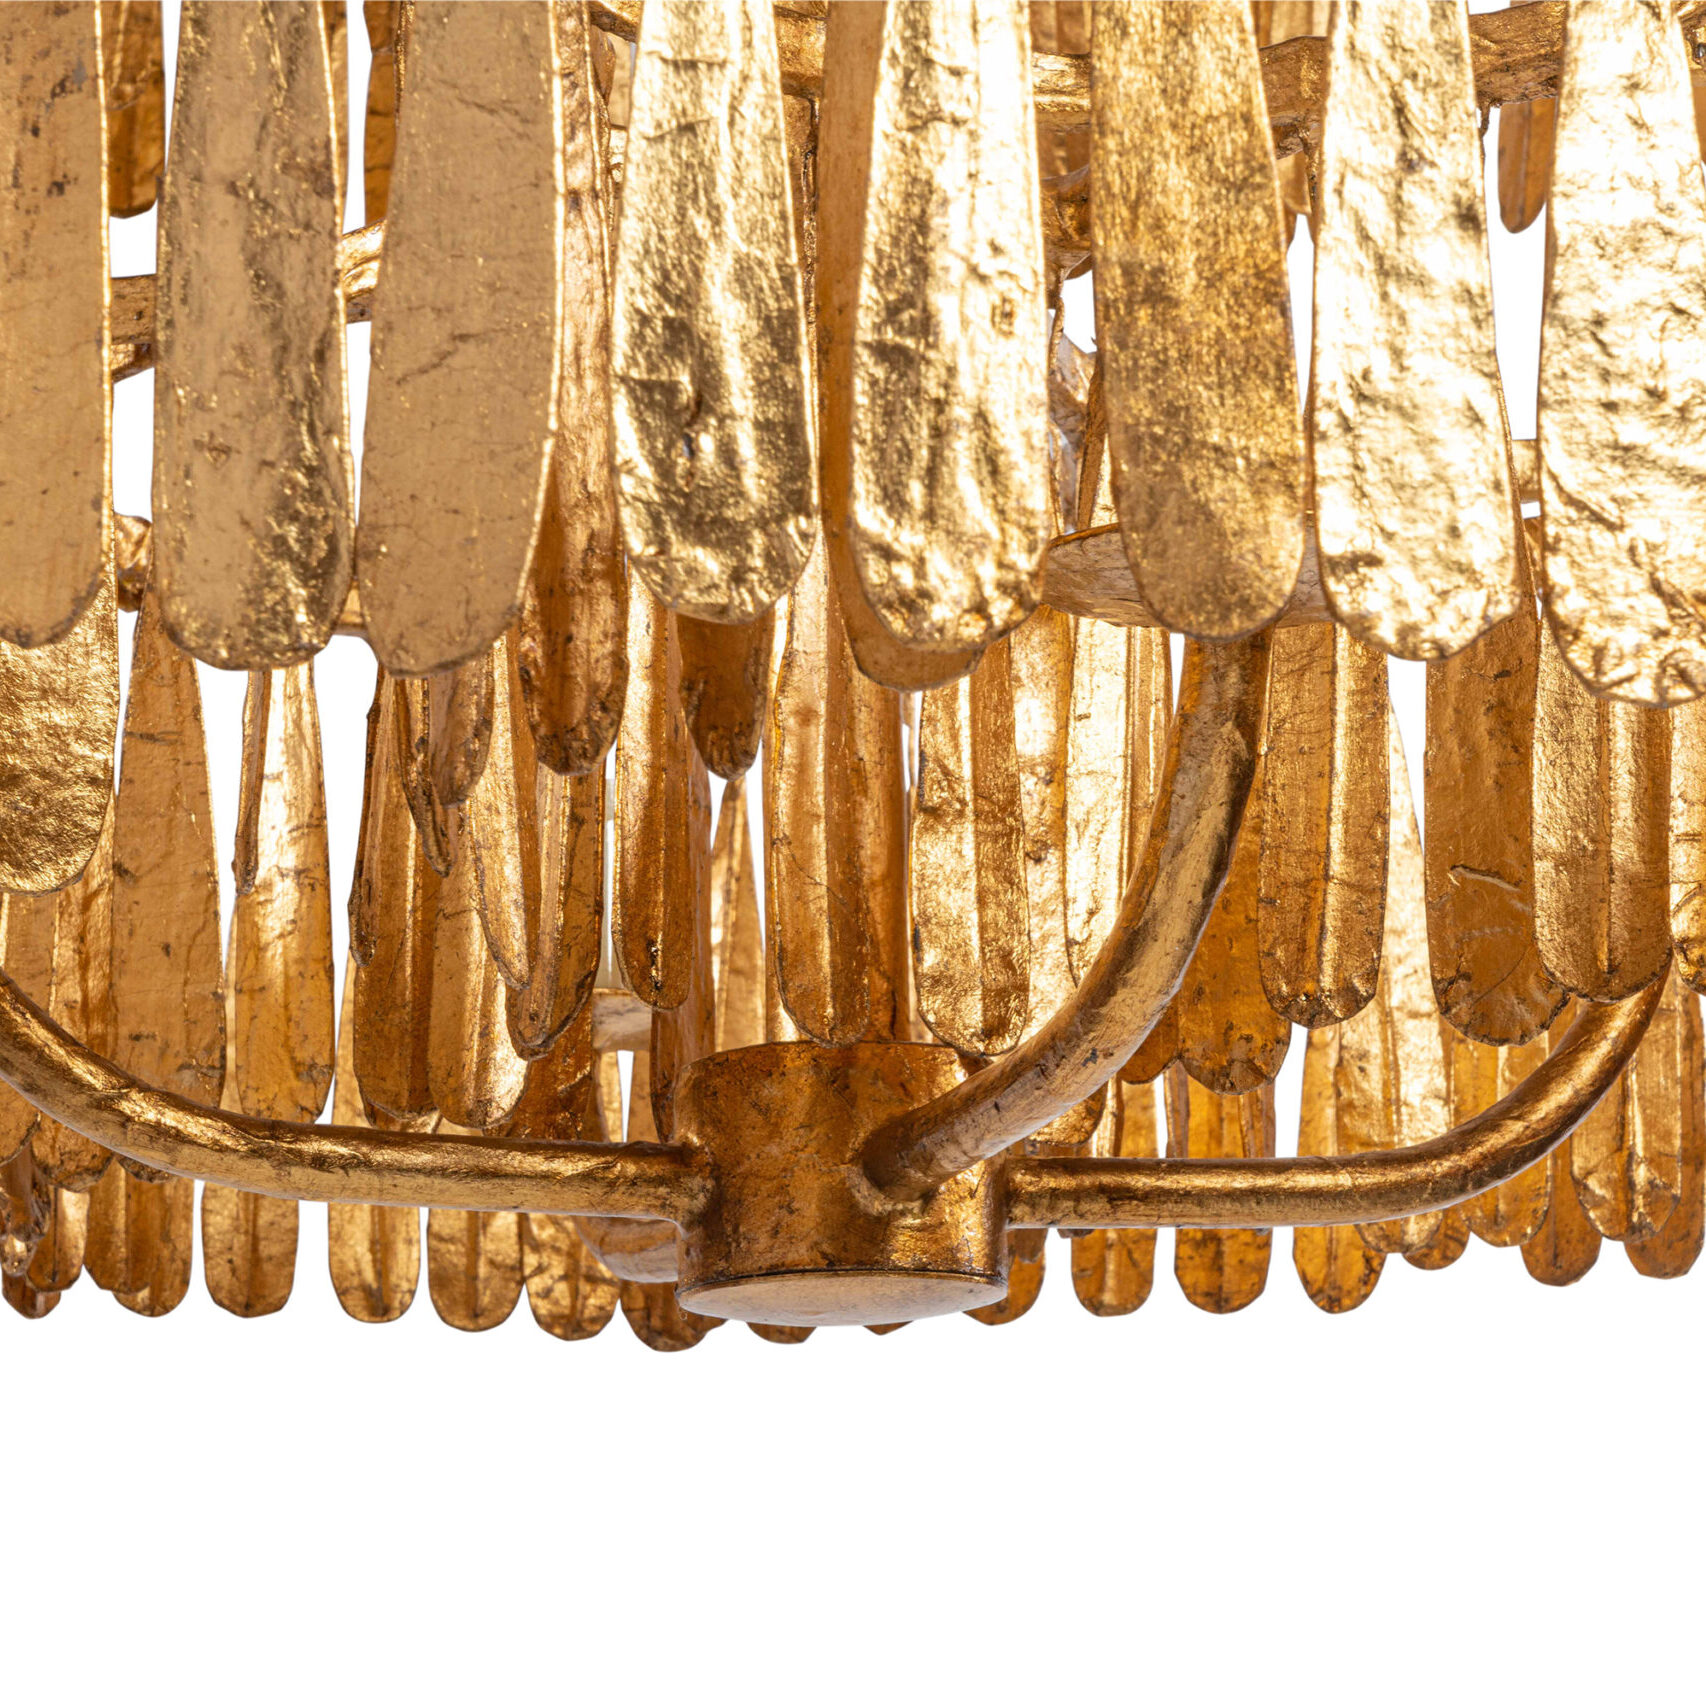 Custom Midas Three Tier Chandelier with Descending Tiers in Aged Gold